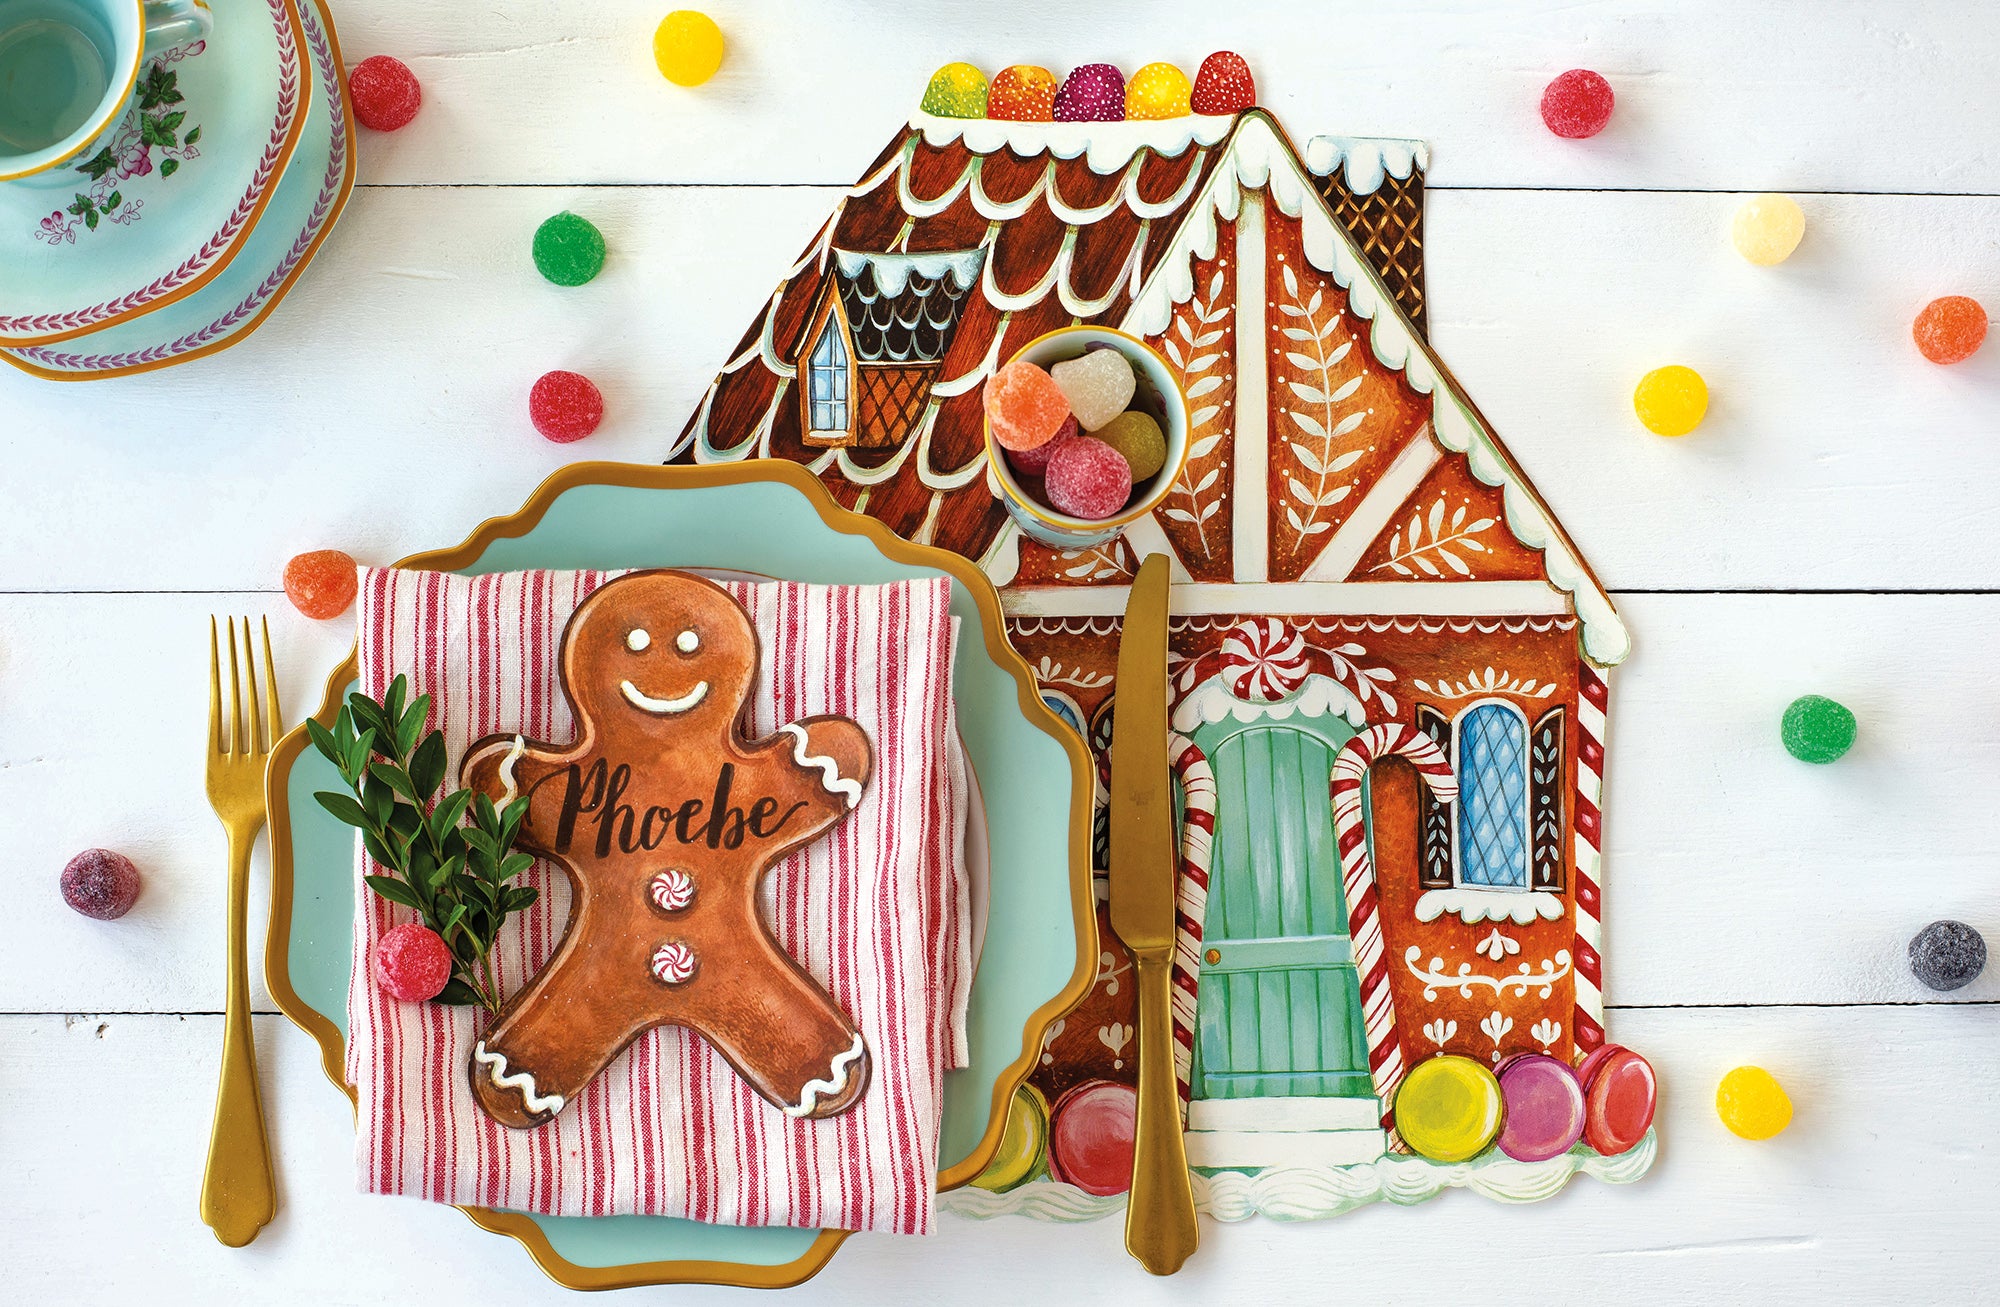 Die-cut Gingerbread House Placemat